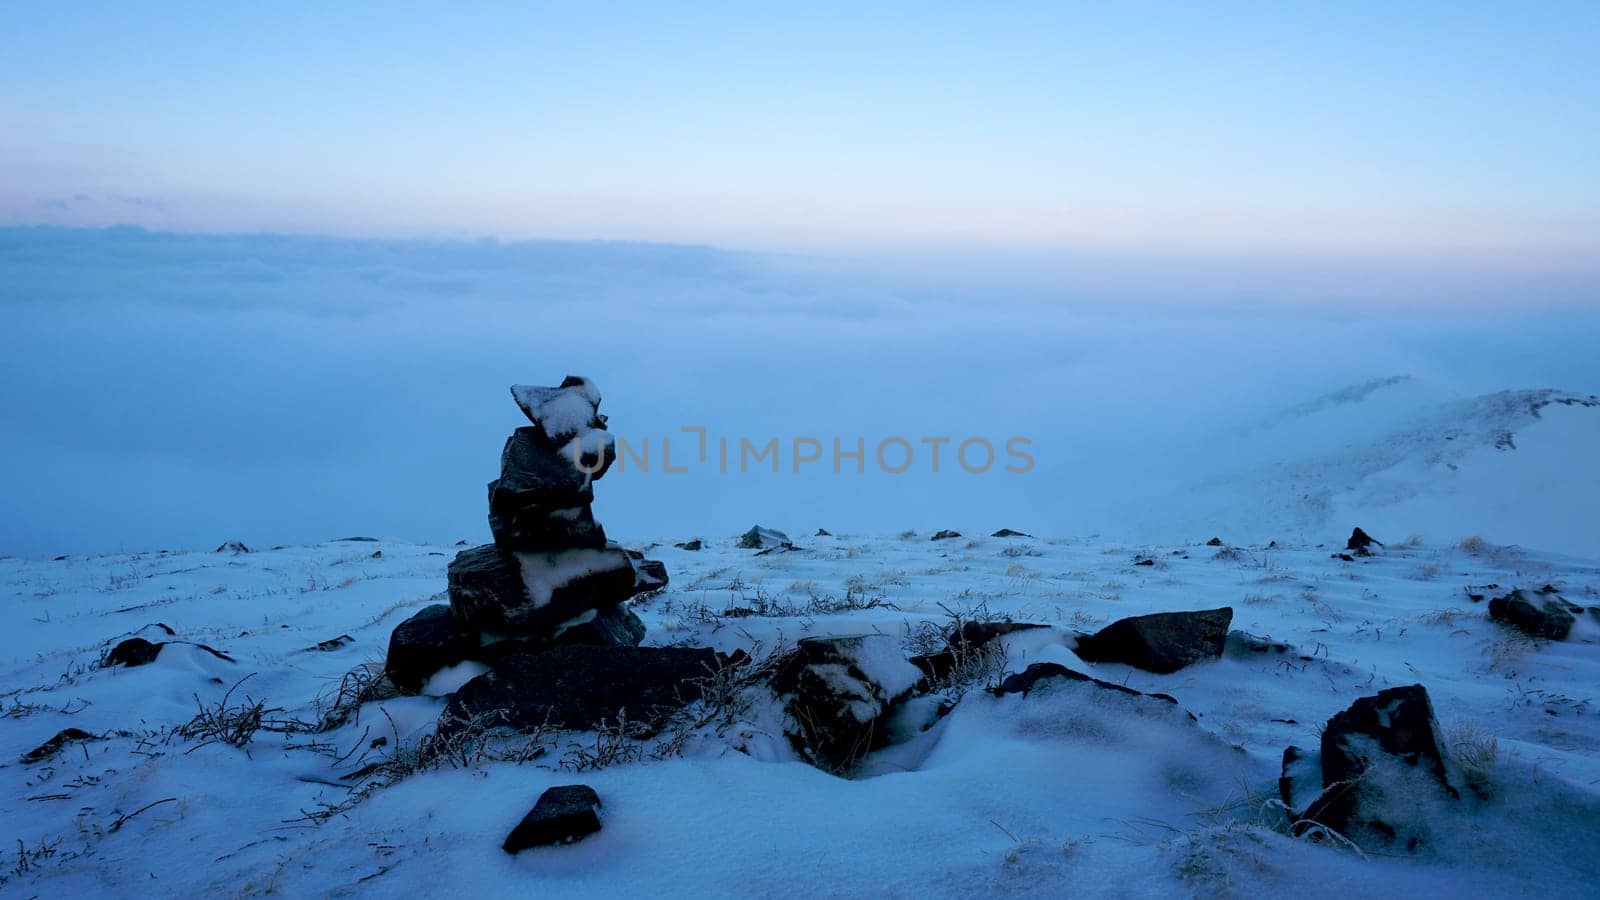 An ocean of clouds in the snowy mountains at dawn. White clouds are like a carpet in a gorge. Waves rise and descend from the mountains. Sunrise of the yellow sun. There are signposting stones. Almaty